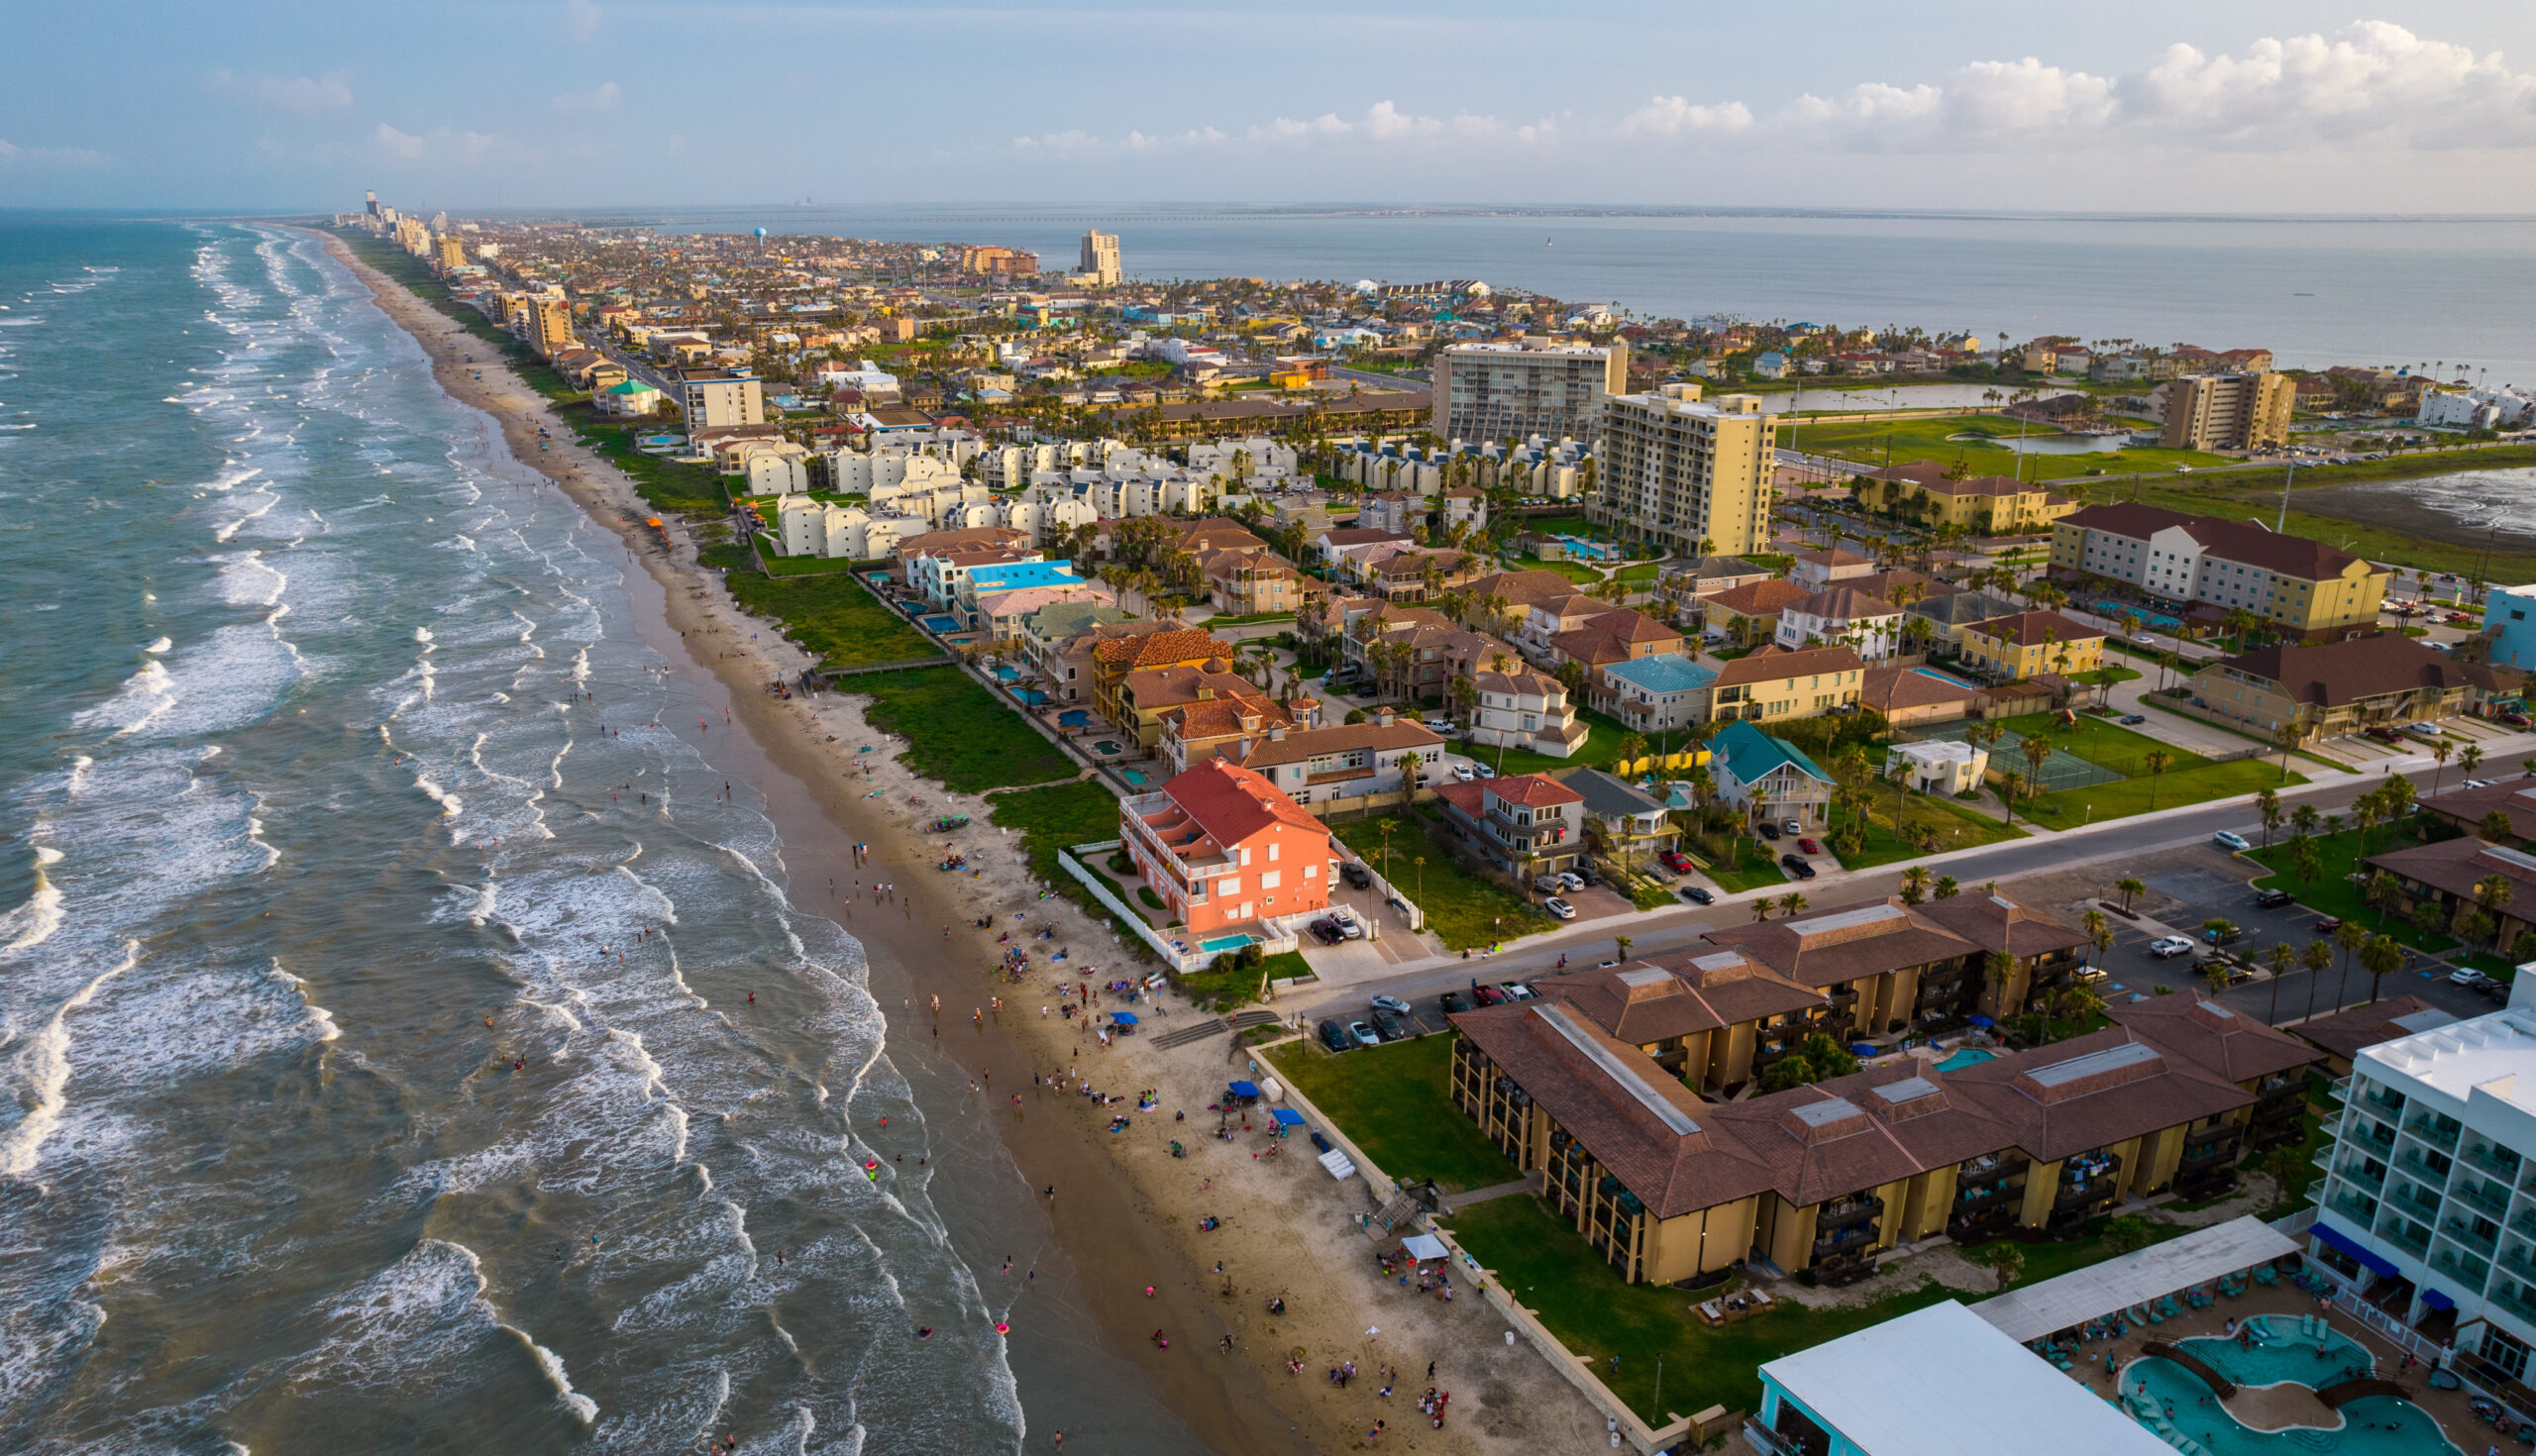 aerial drone views above South Padre Island , Texas , USA at Port Isabel with beach front condos and hotels and travel resort destination of South Texas